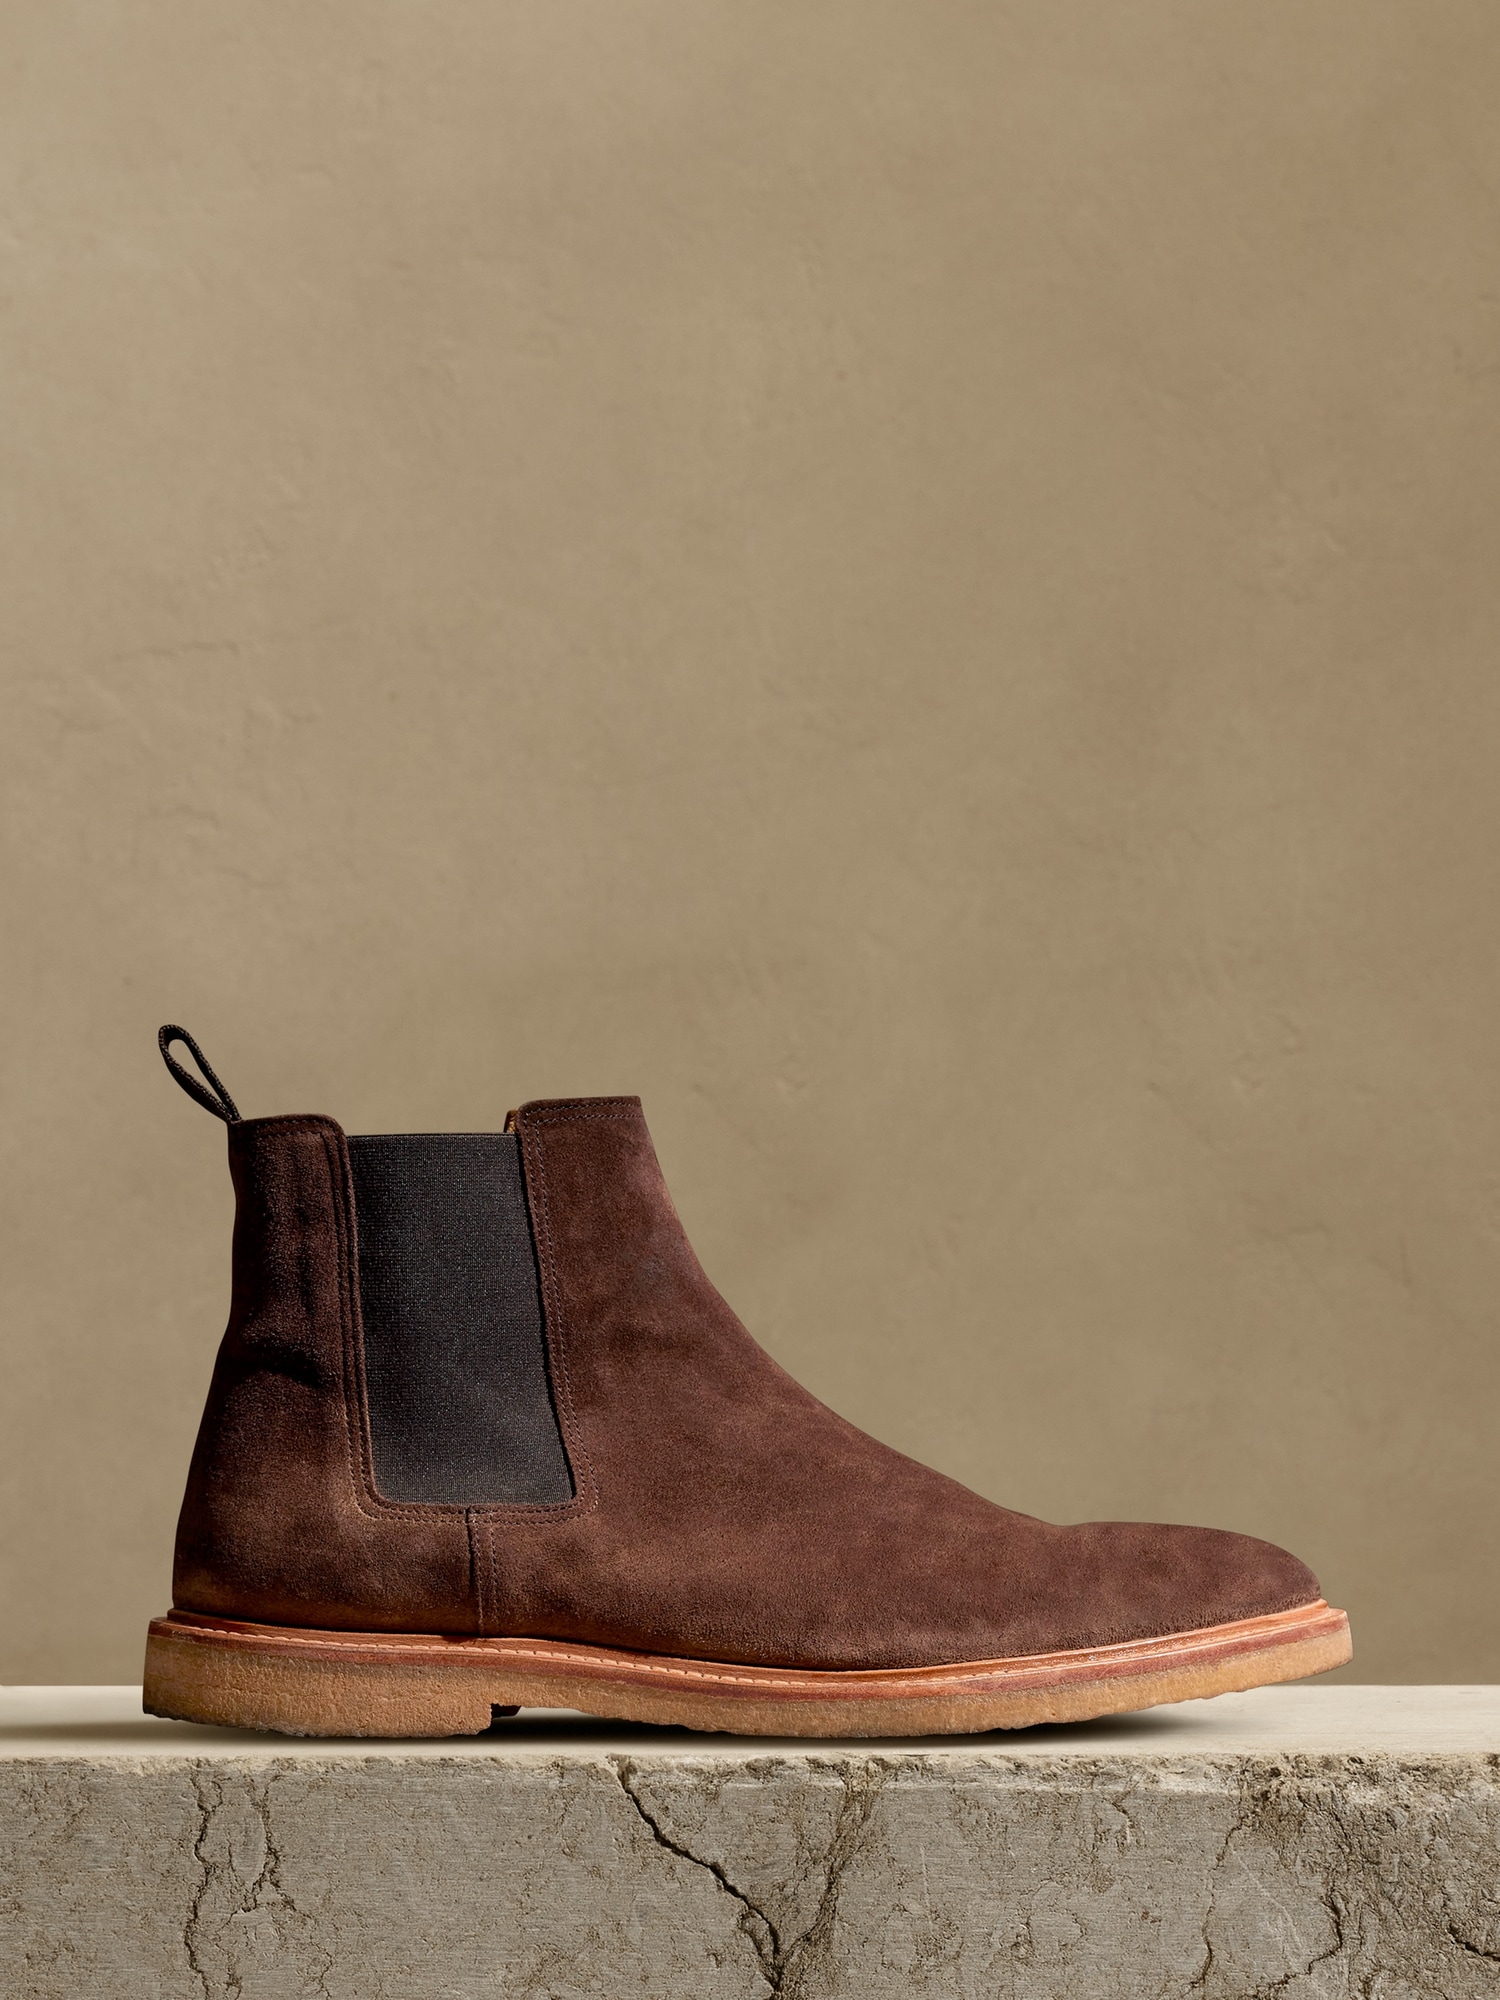 Banana Republic Tanner Suede Boot with Crepe-Sole brown. 1